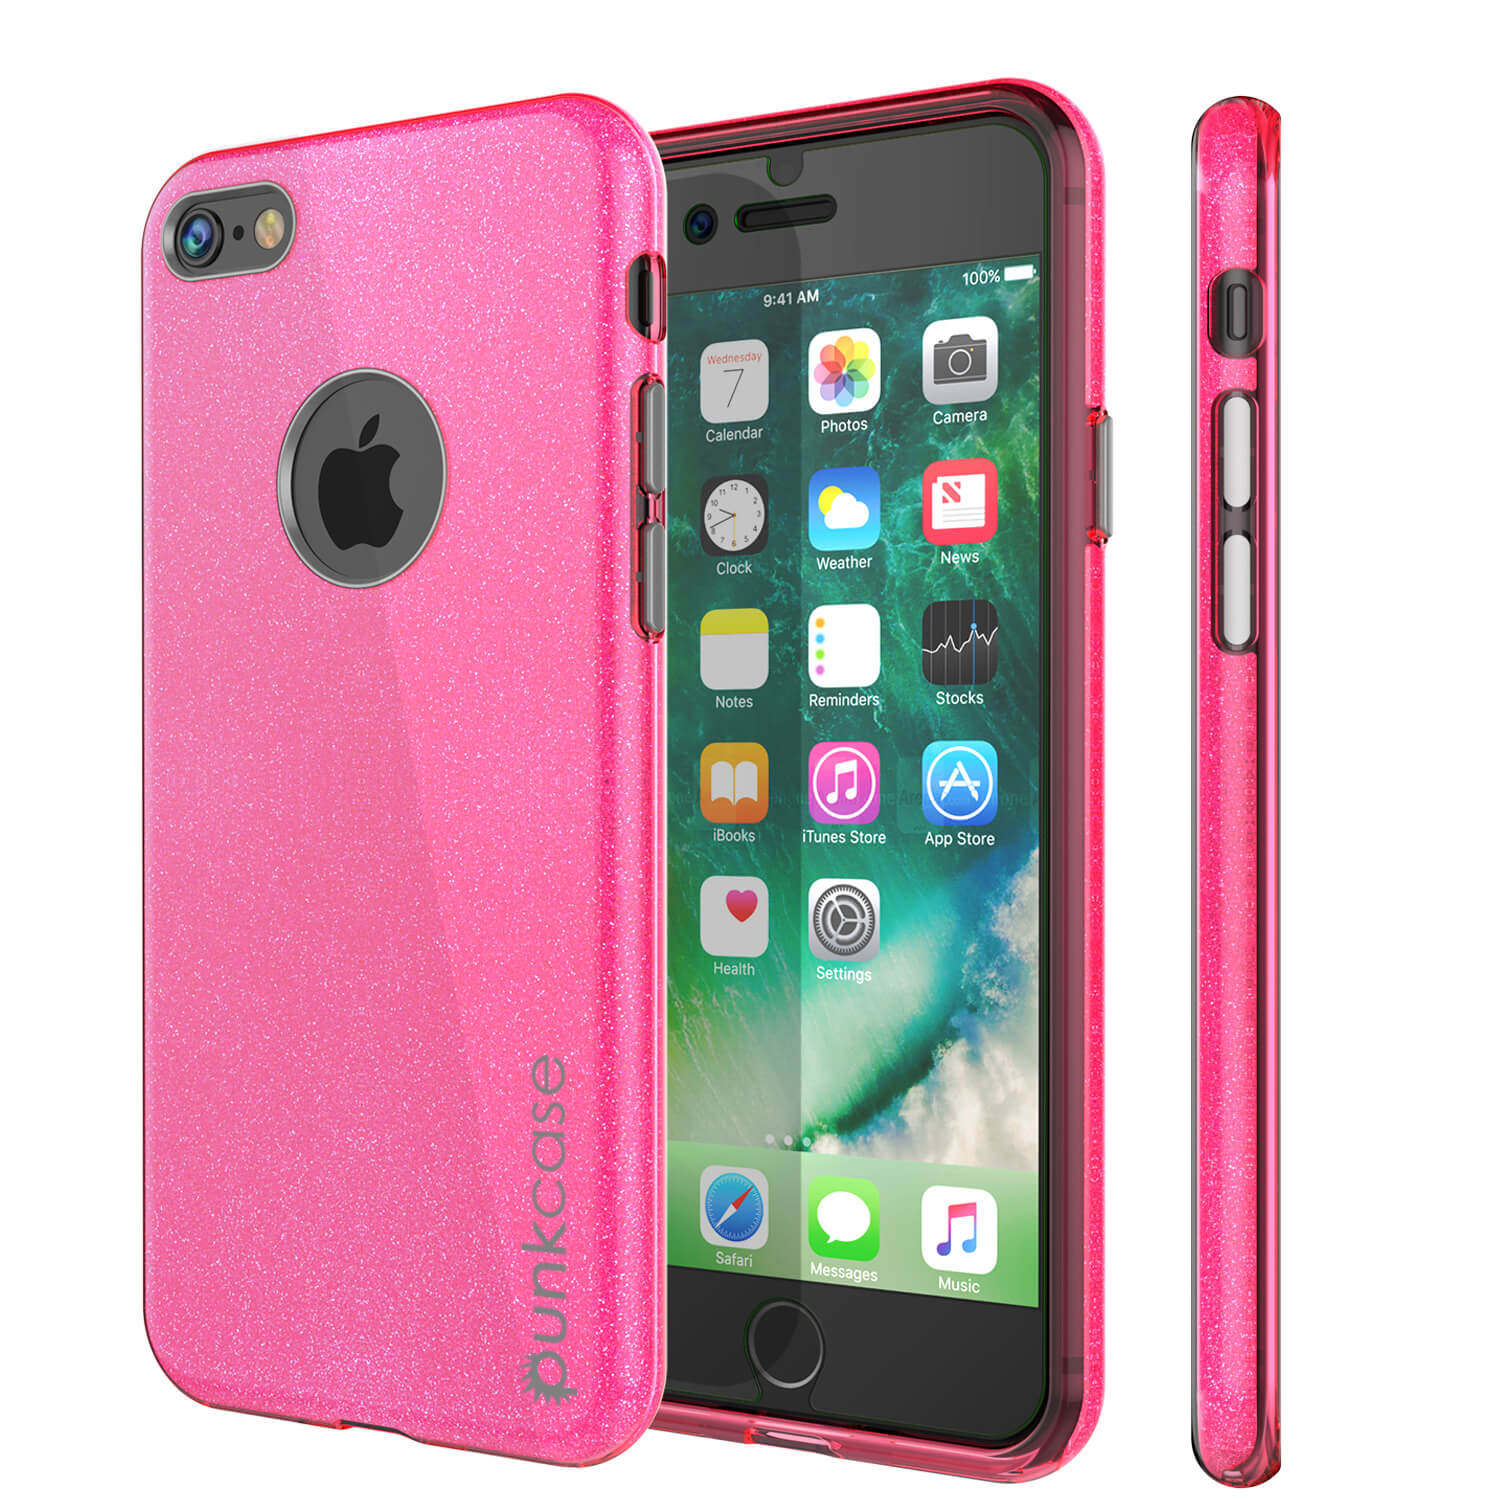 iPhone 6s/6 Case PunkCase Galactic Pink Series  Slim w/ Tempered Glass | Lifetime Warranty (Color in image: pink)